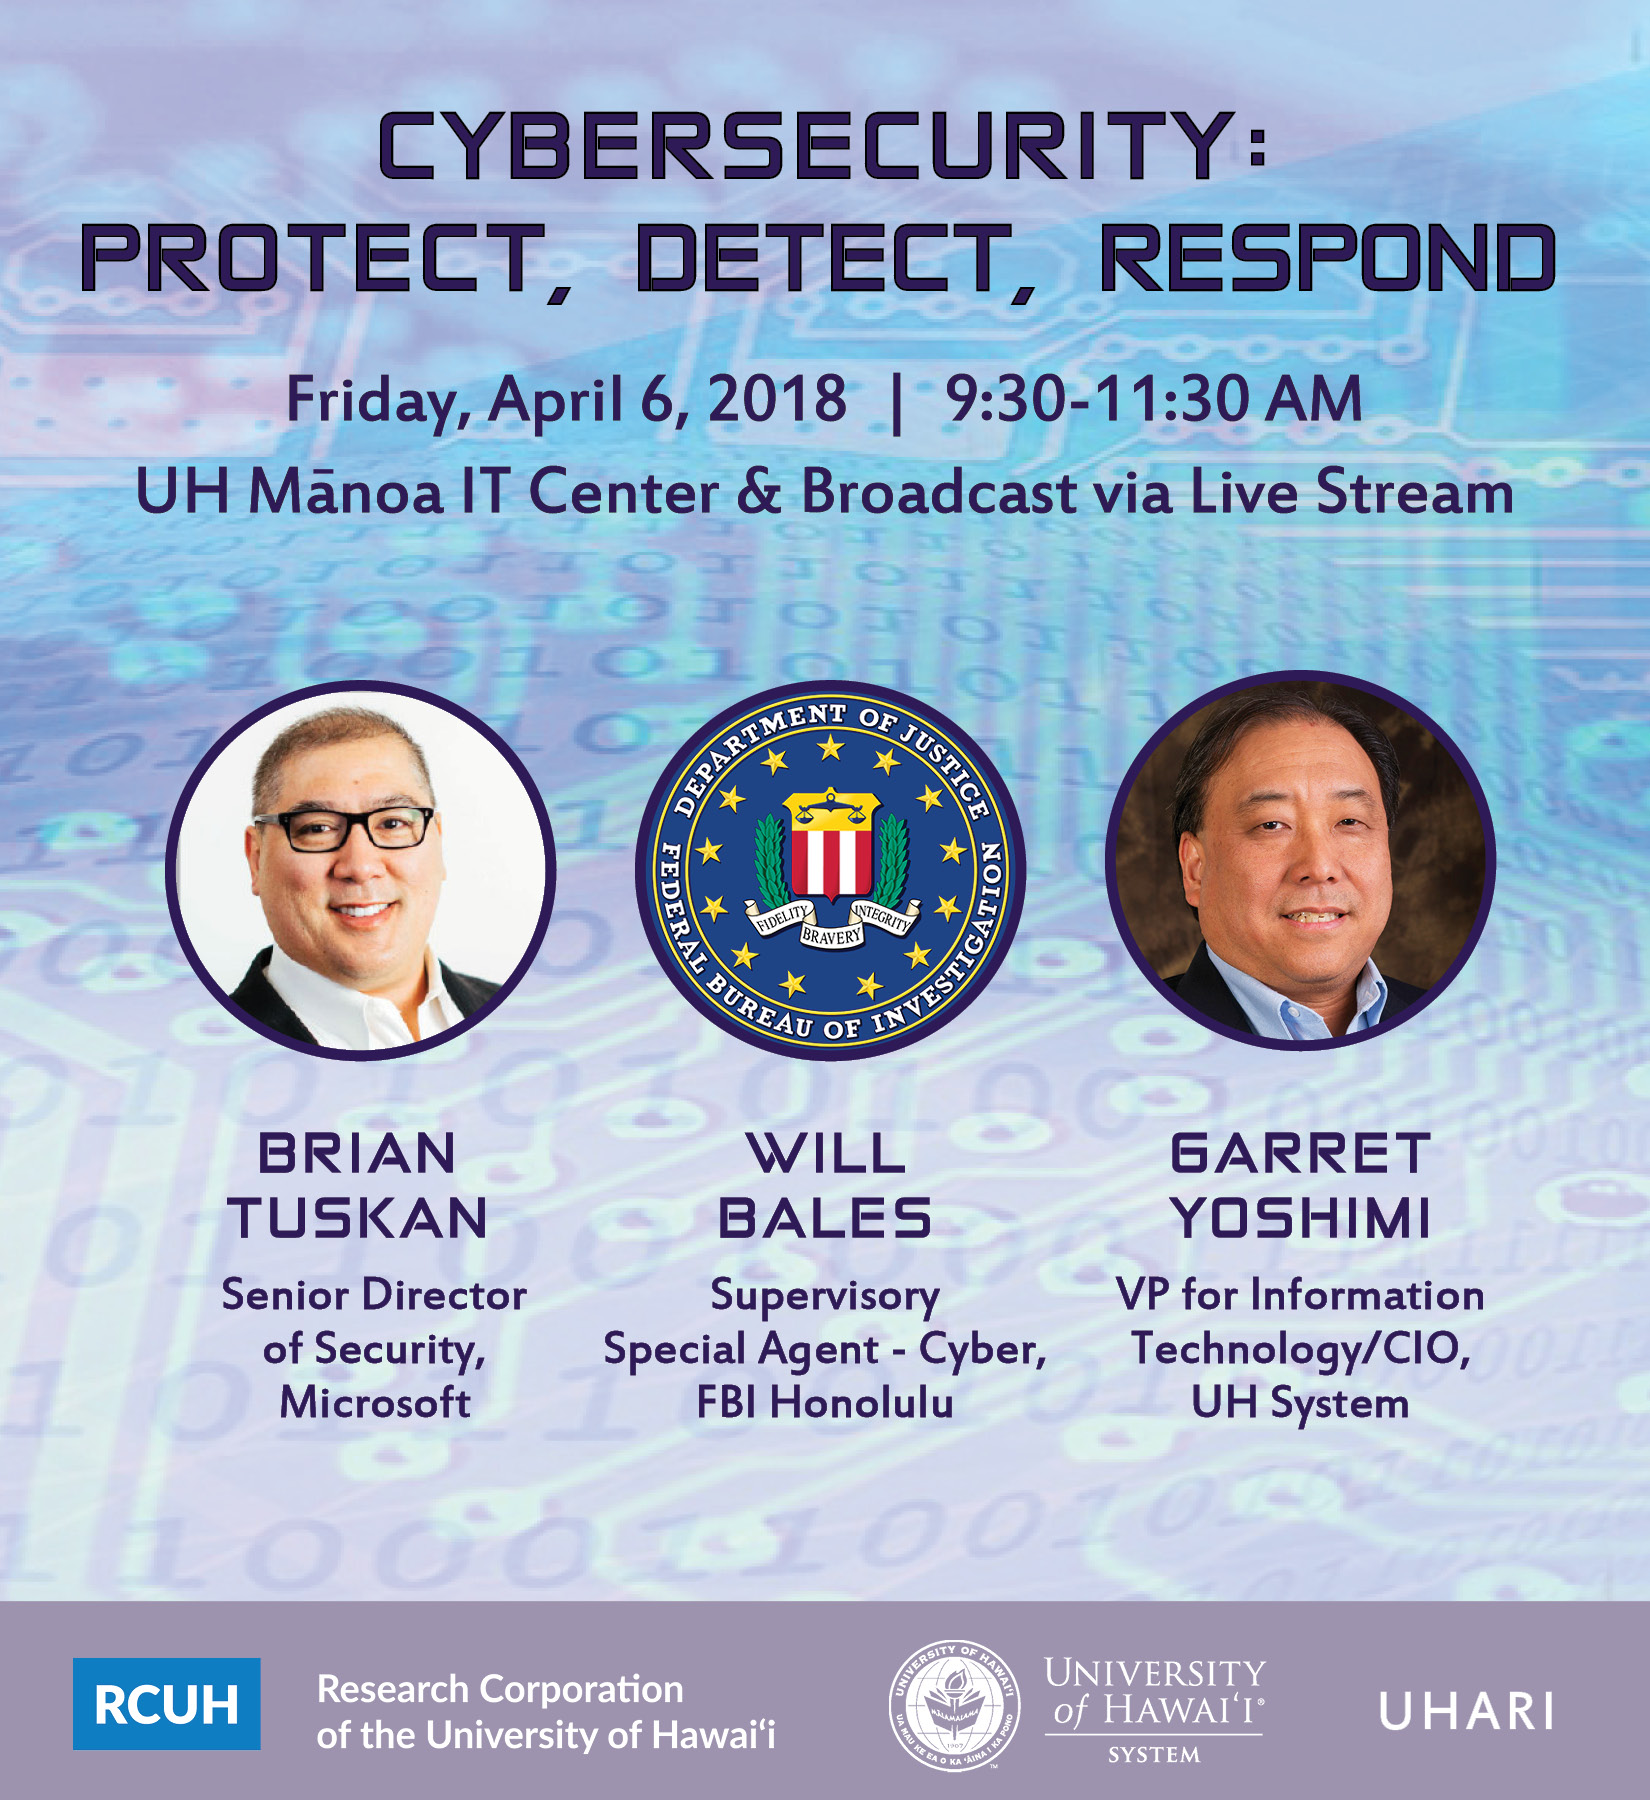 Cybersecurity: Protect, Detect, Respond - Friday, April 6, 2018